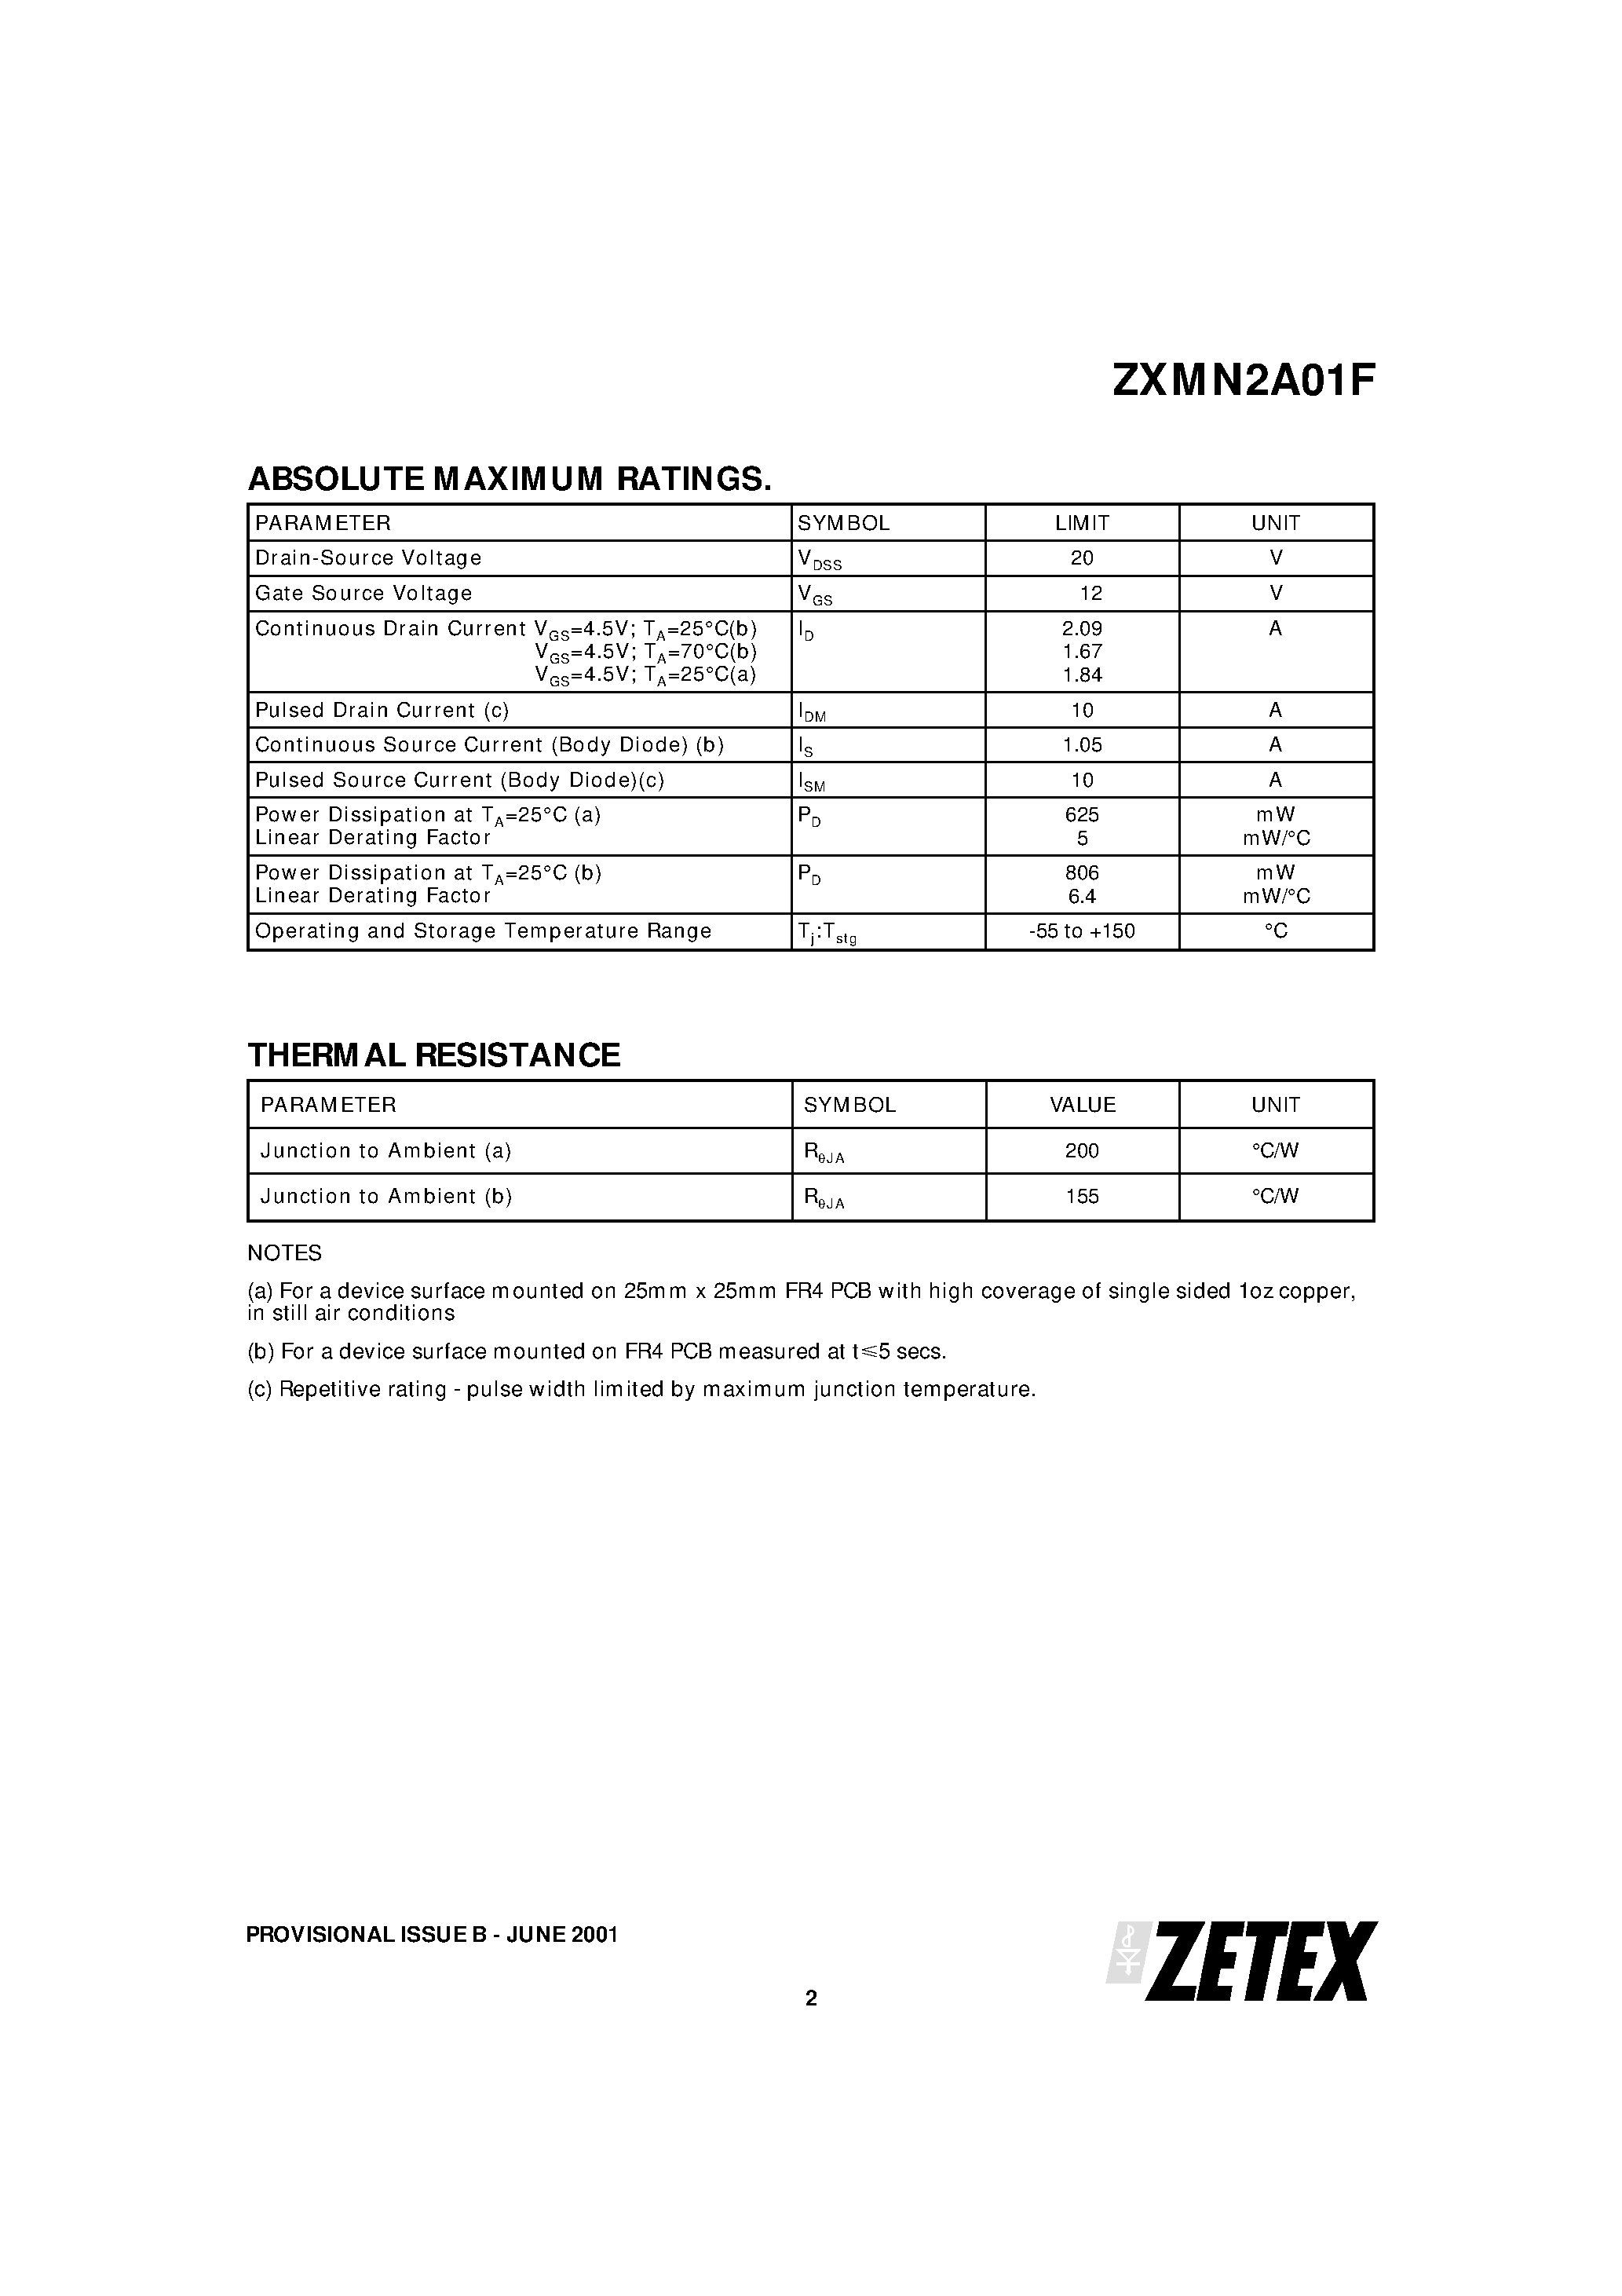 Datasheet ZXMN2A01 - 20V N-CHANNEL ENHANCEMENT MODE MOSFET page 2